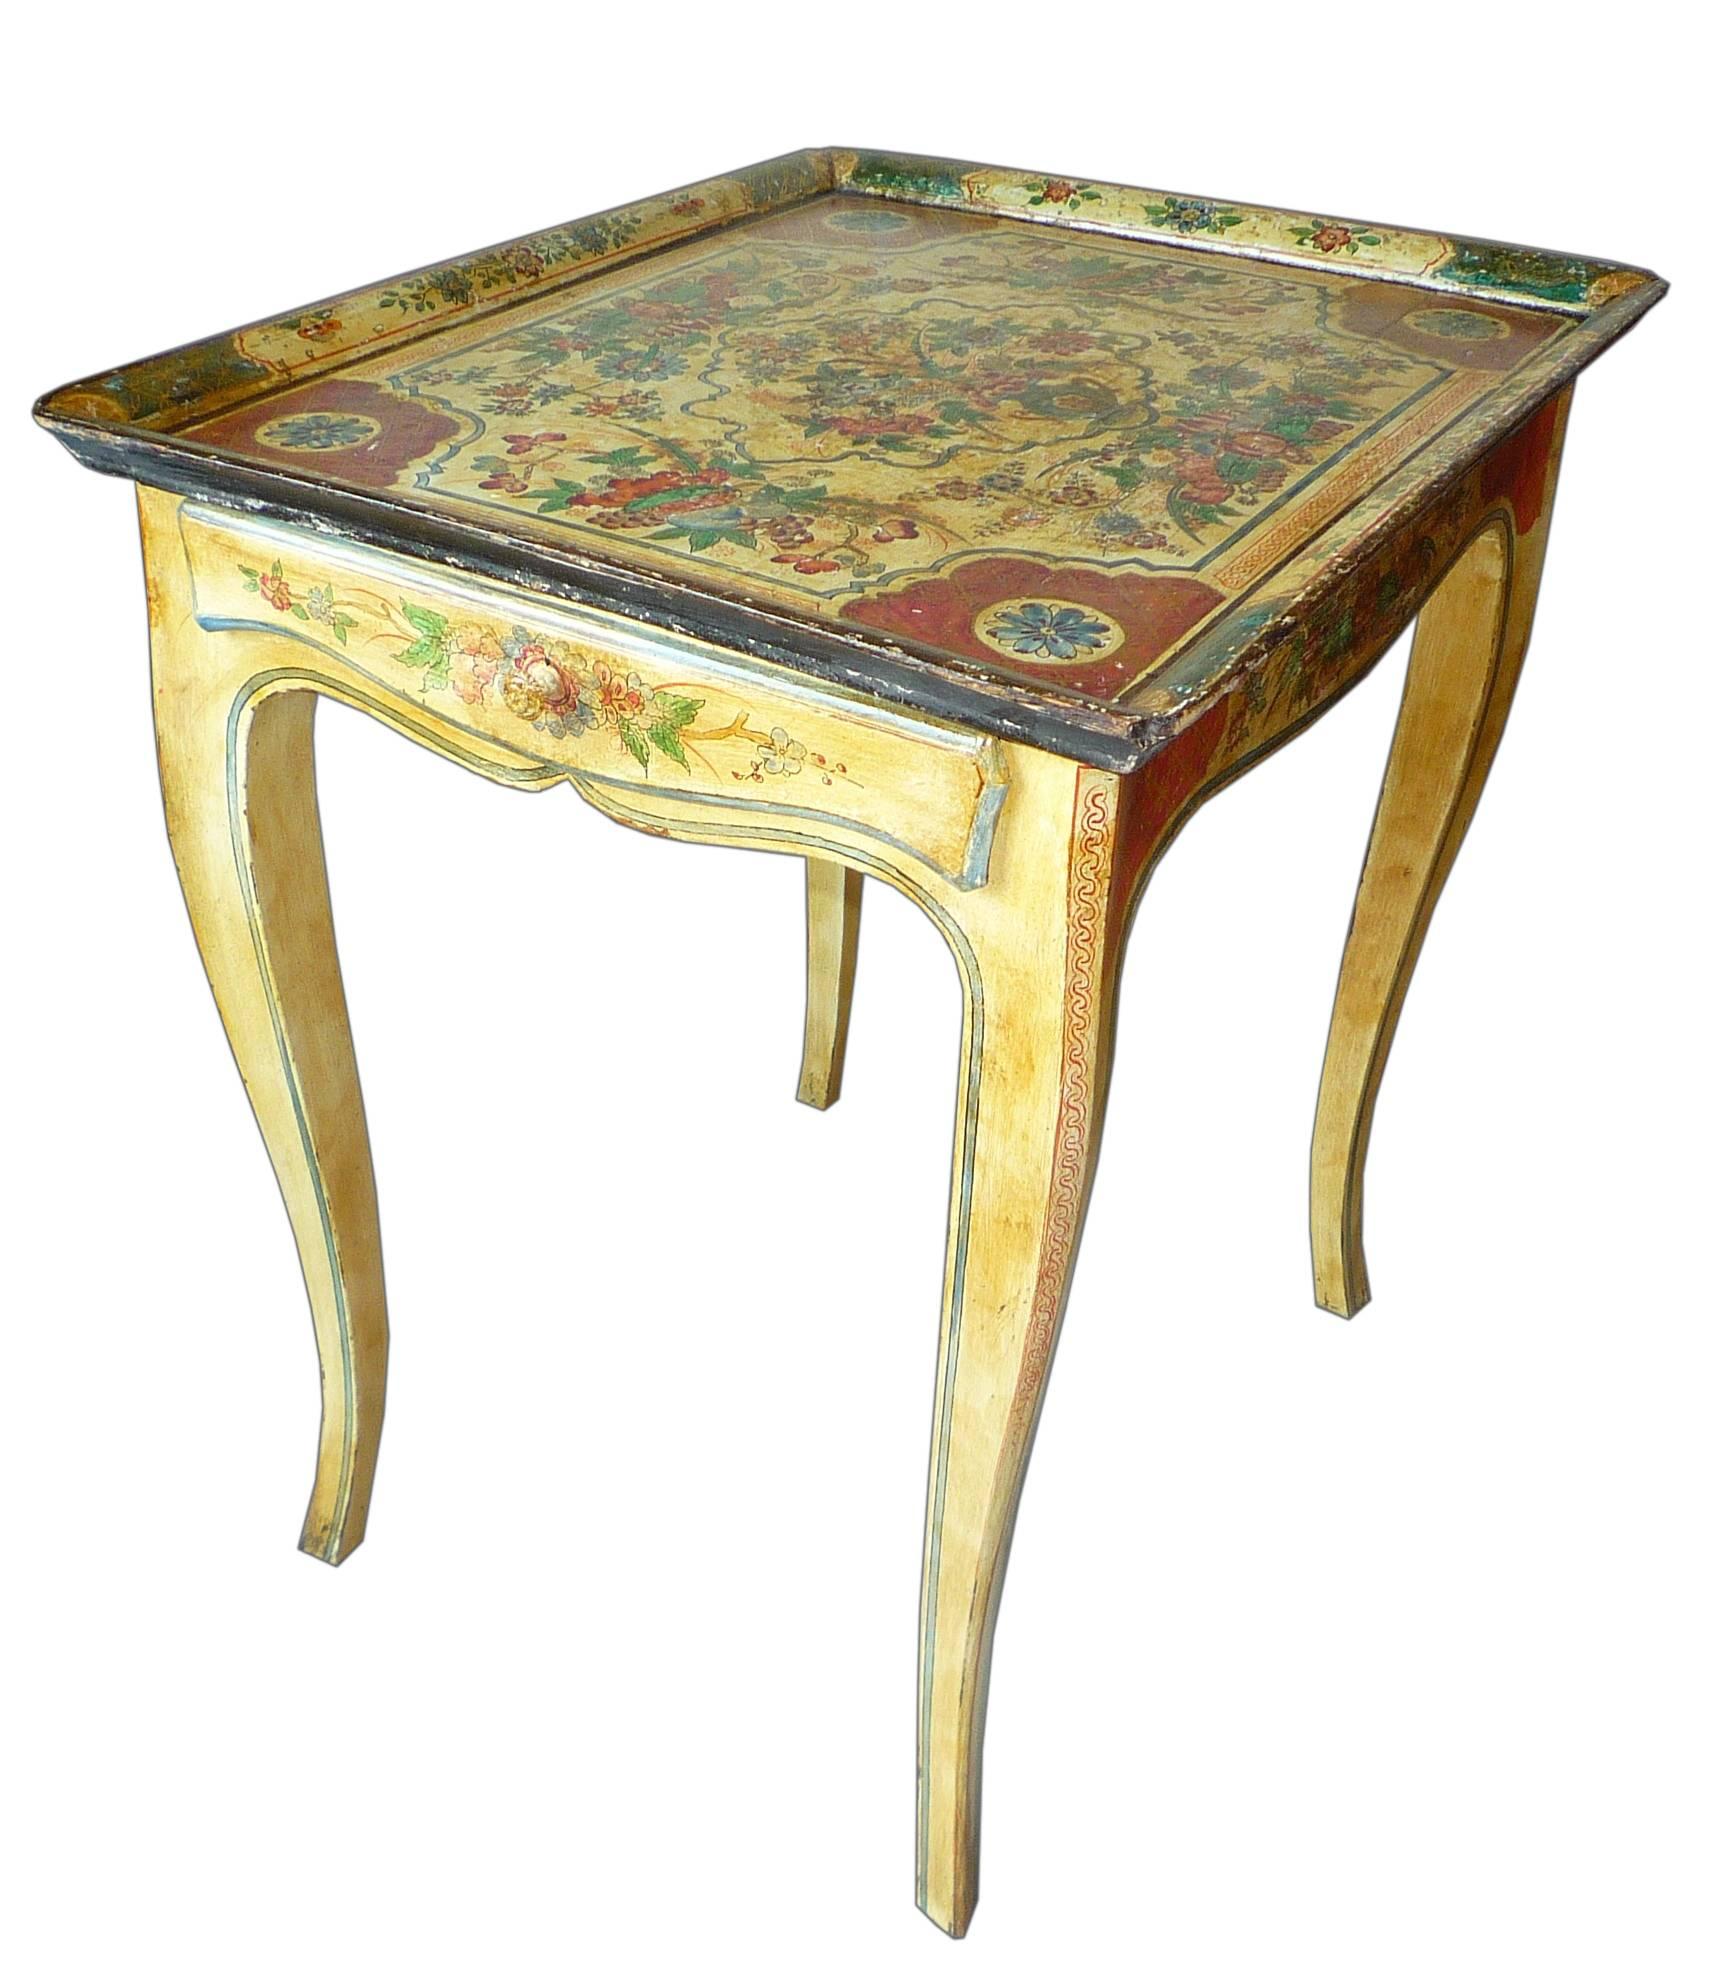 A small painted table, the decor of flowers in a vase. The tray is mid-18th century, from Venice, and the base is 1950s.